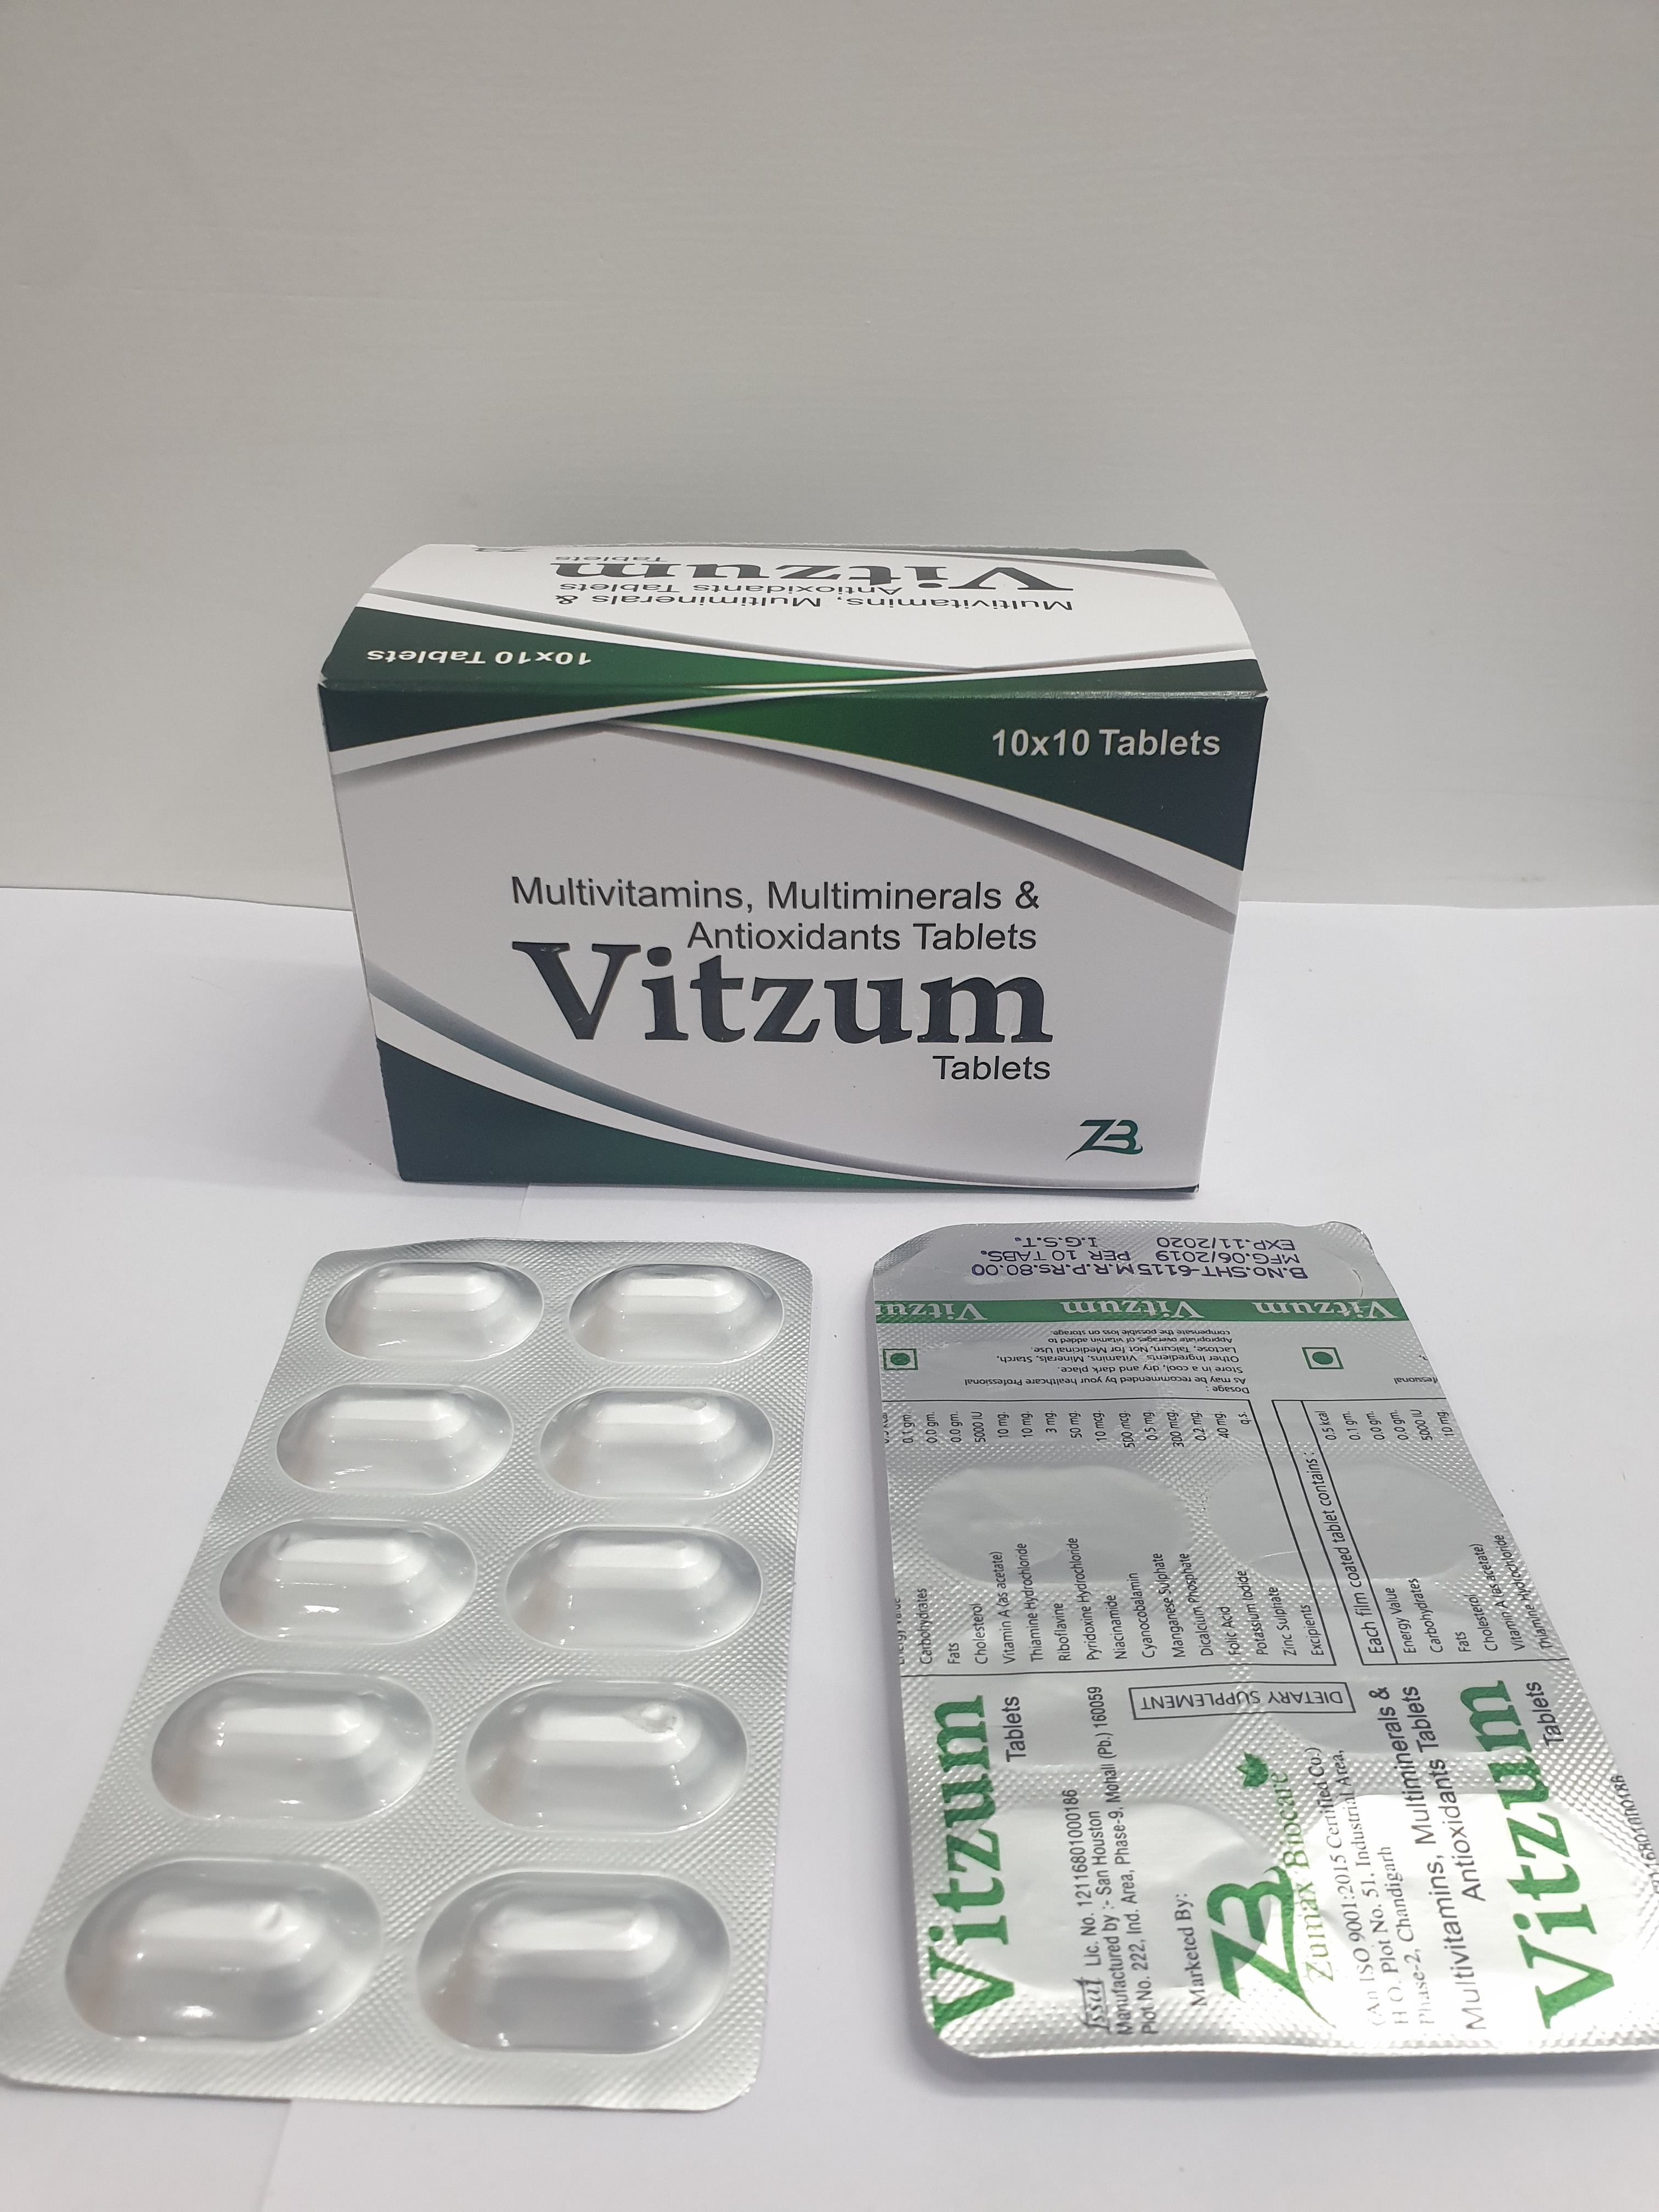 Product Name: Vitzum, Compositions of Multivitamins, Multiminerals & Antioxidants Tablets are Multivitamins, Multiminerals & Antioxidants Tablets - Zumax Biocare